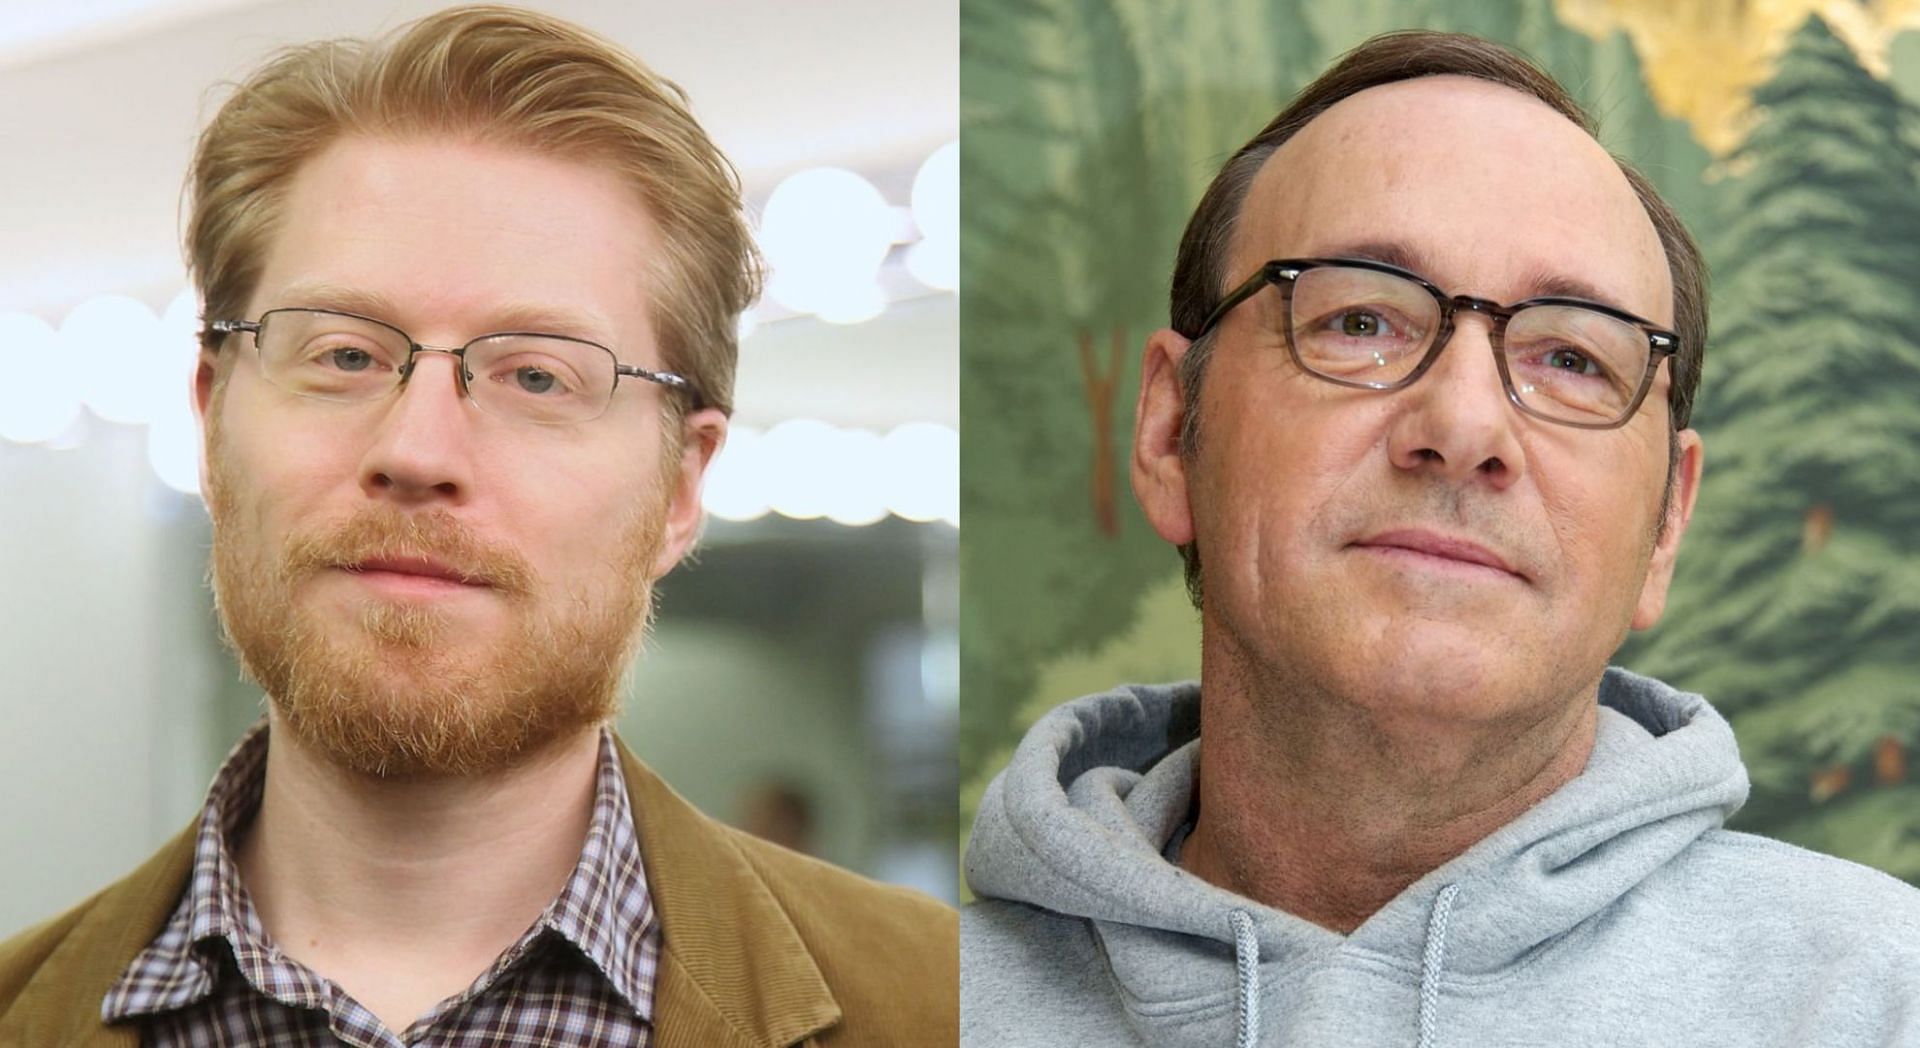 Anthony Rapp filed a civil lawsuit against Kevin Spacey claiming that the actor allegedly assaulted him when he was 14 (Image via Getty Images)